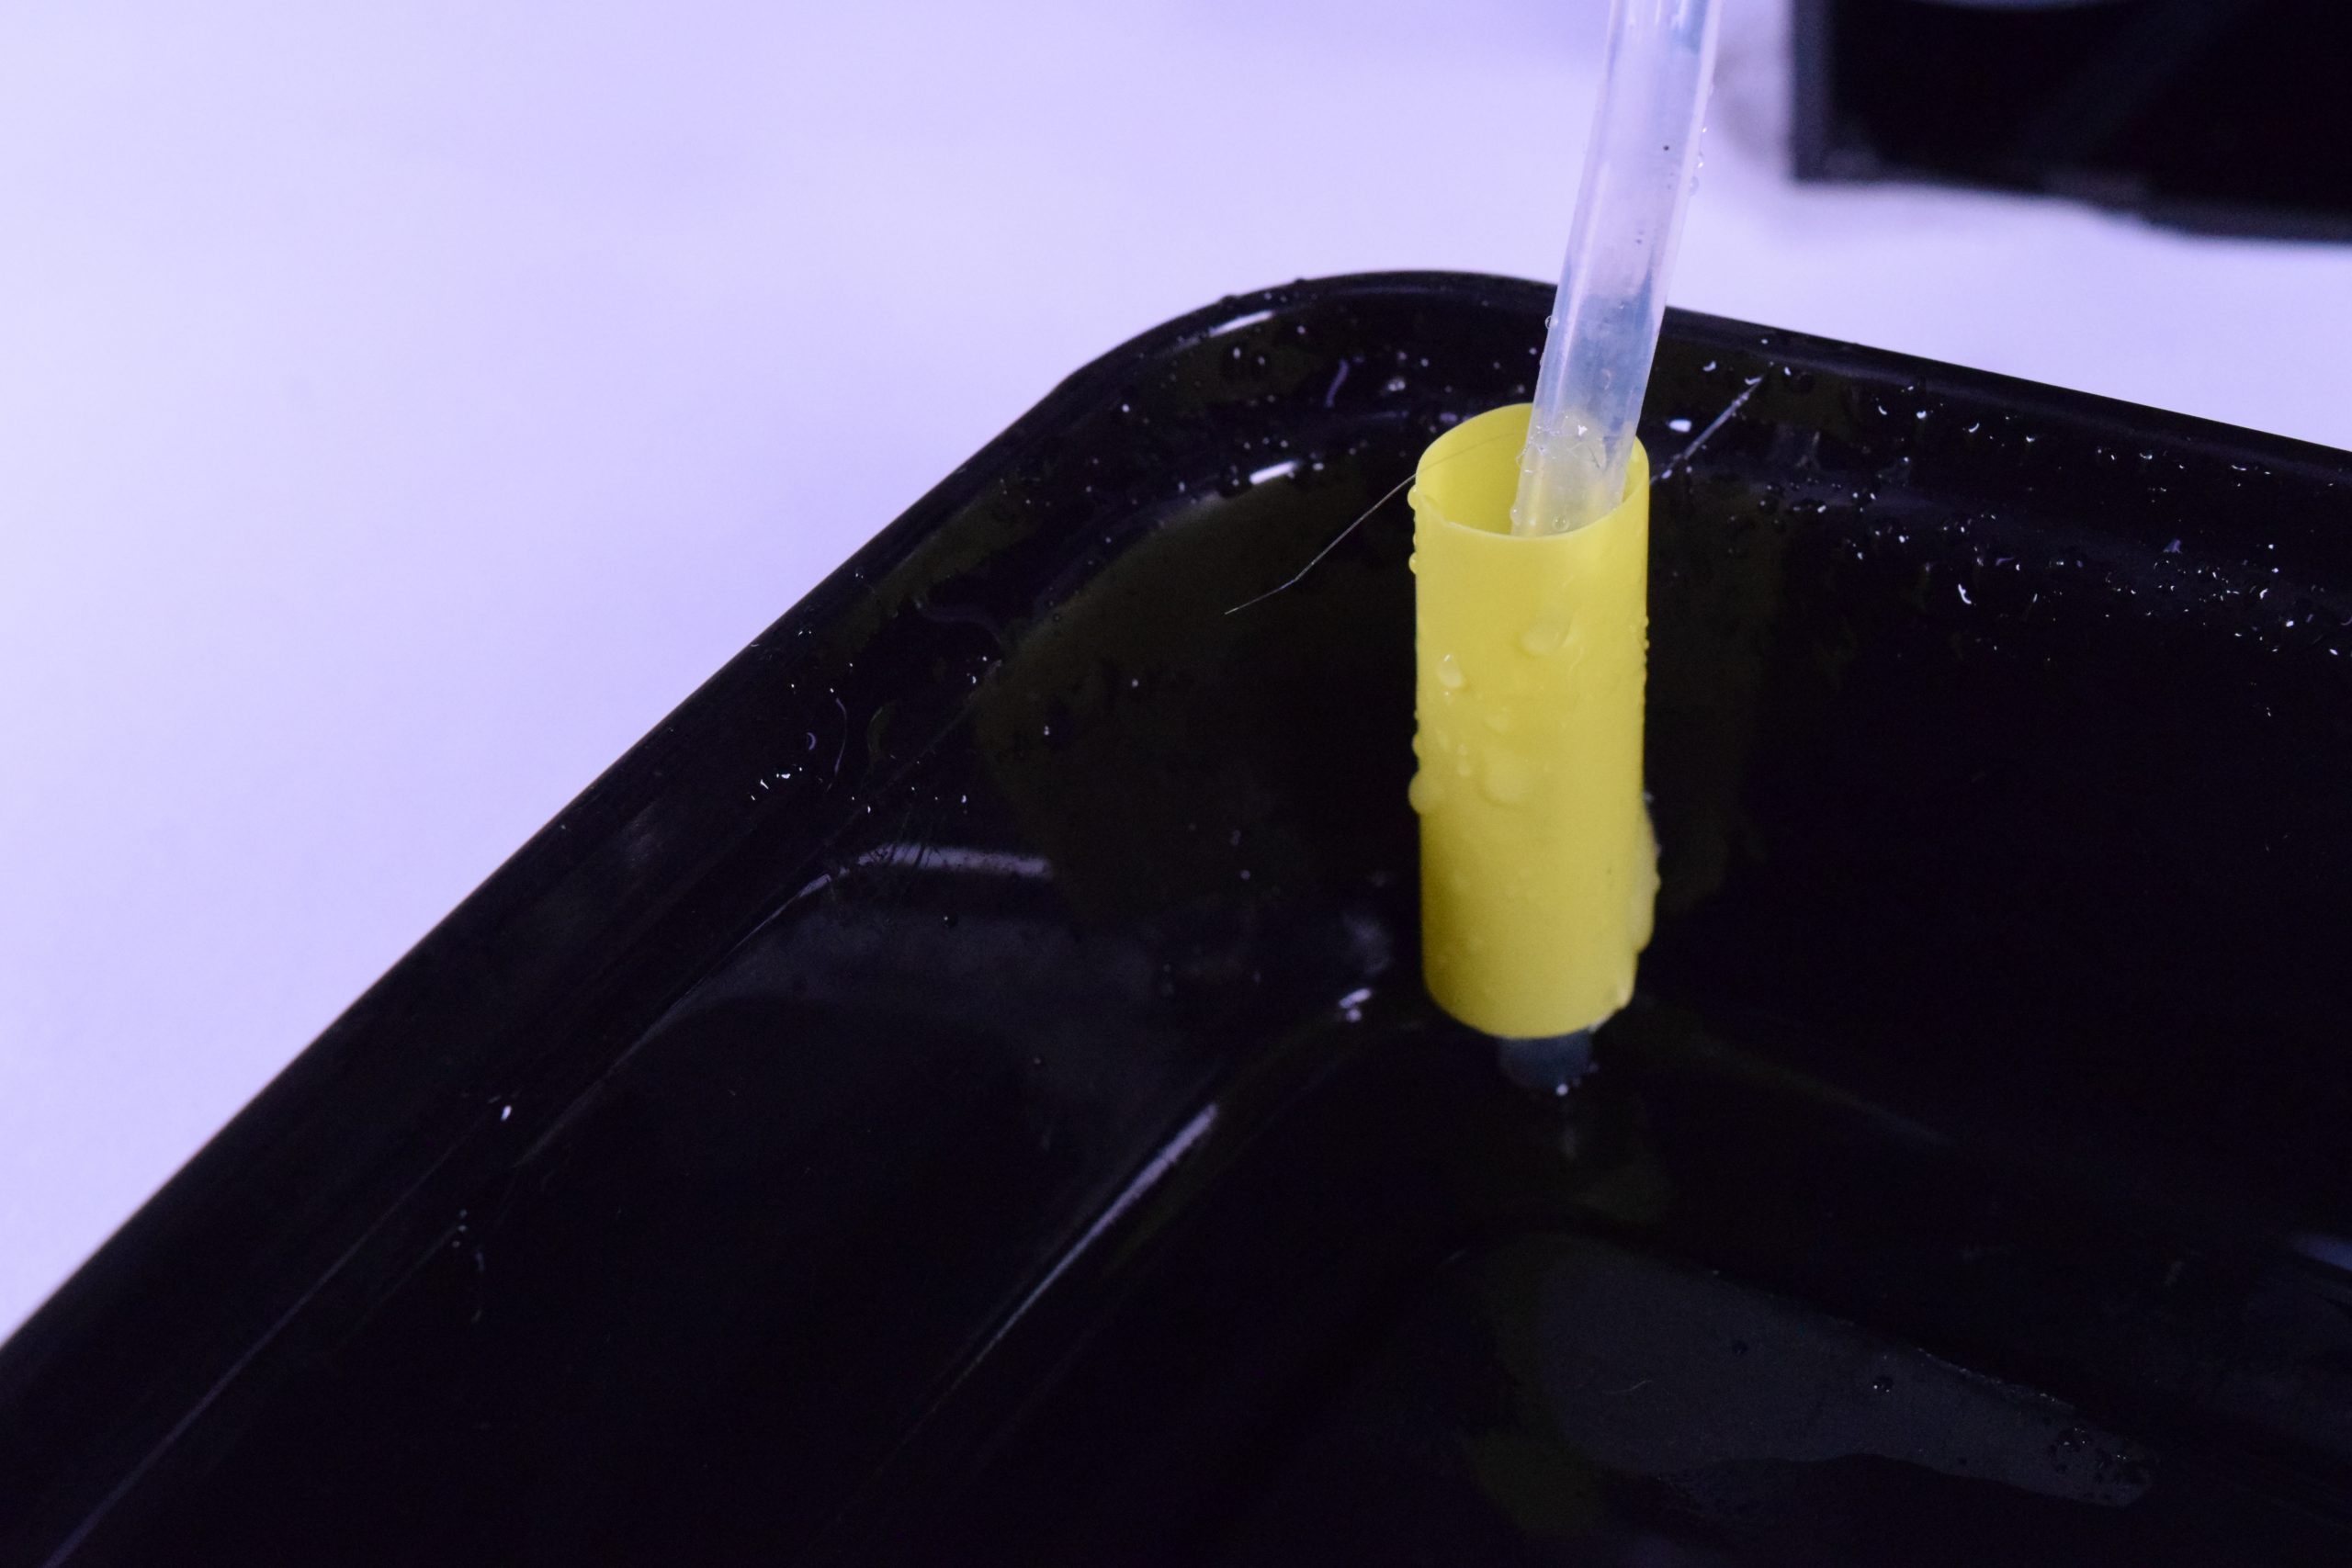 Close-up of a piece of a yellow drinking straw to help guide the tube responsible for bringing water up to the top water container.